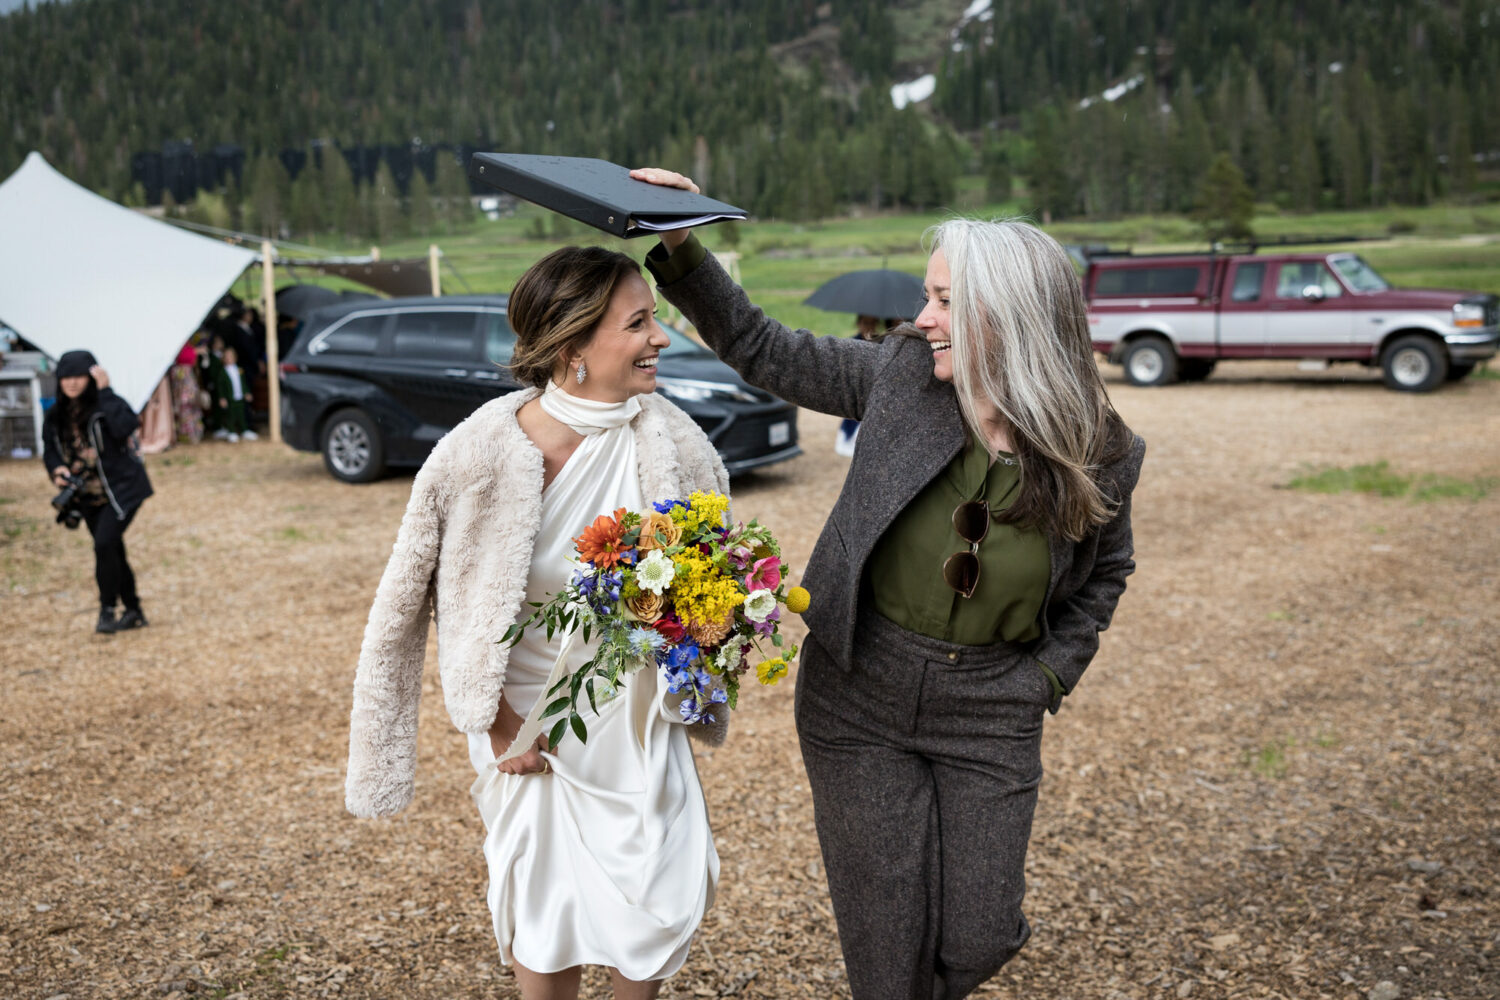 A Lake Tahoe woman rabbi covers the bride's head with a 3-ring binder.